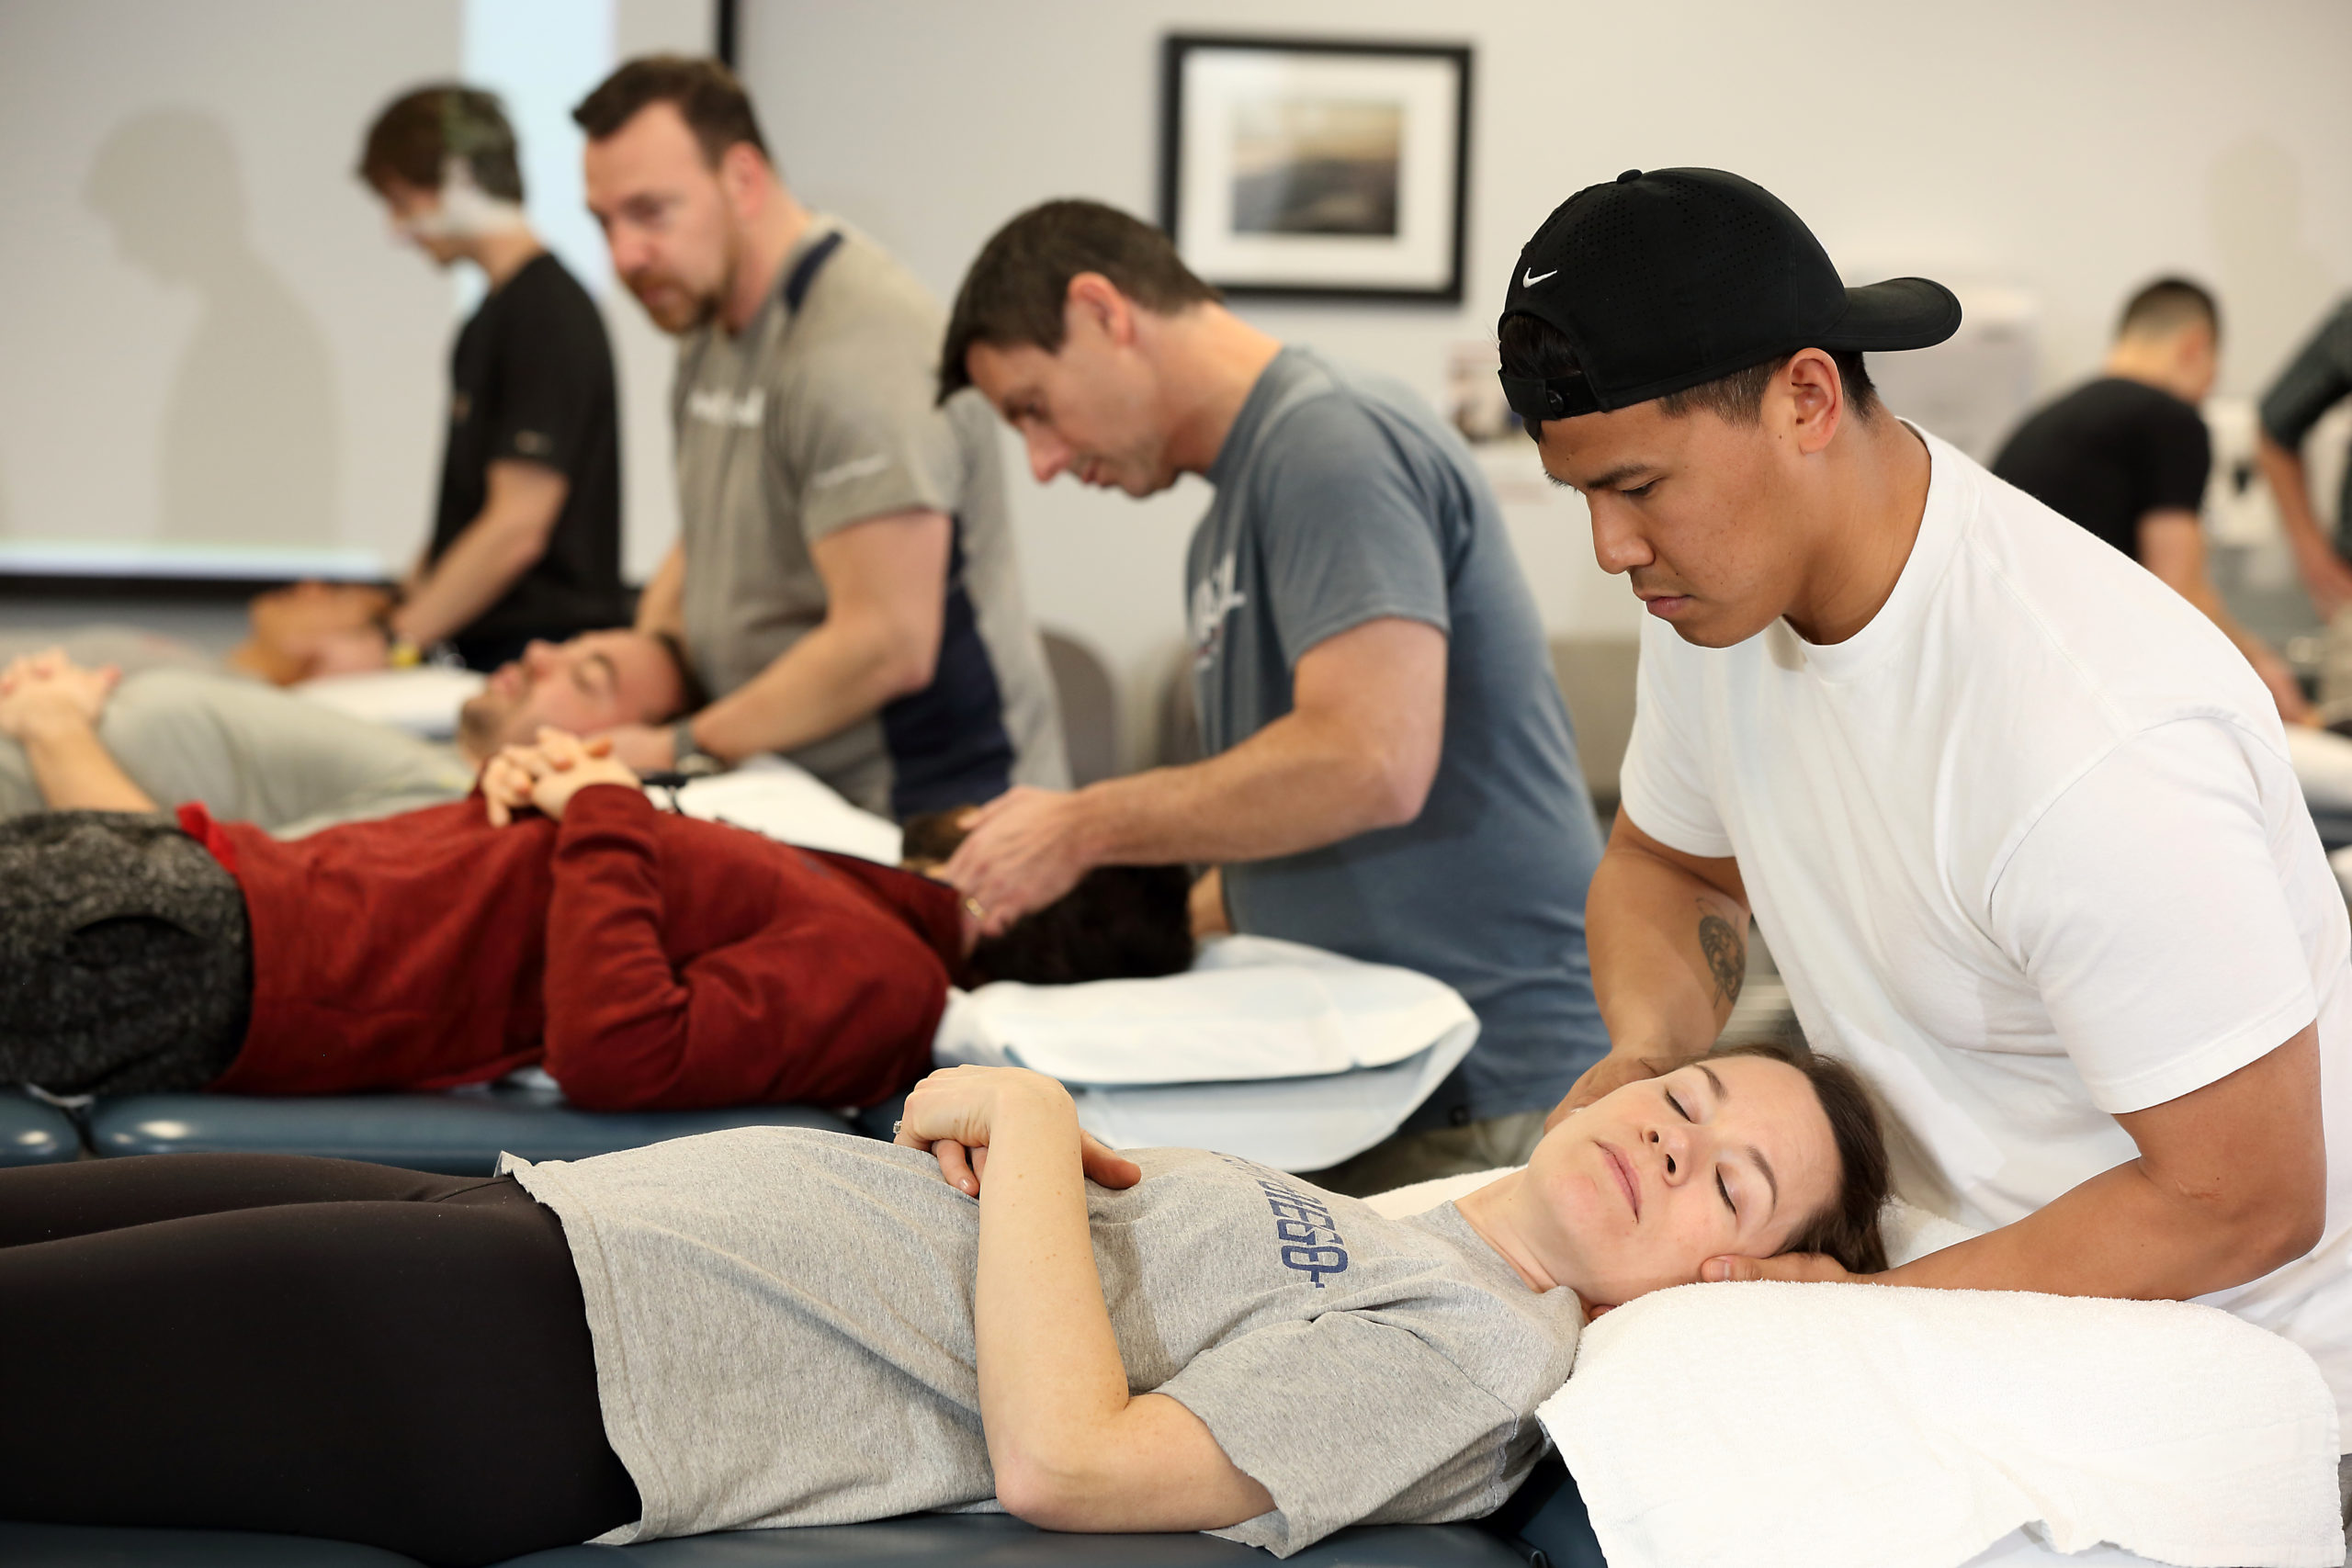 Physical Therapy – FSA Training